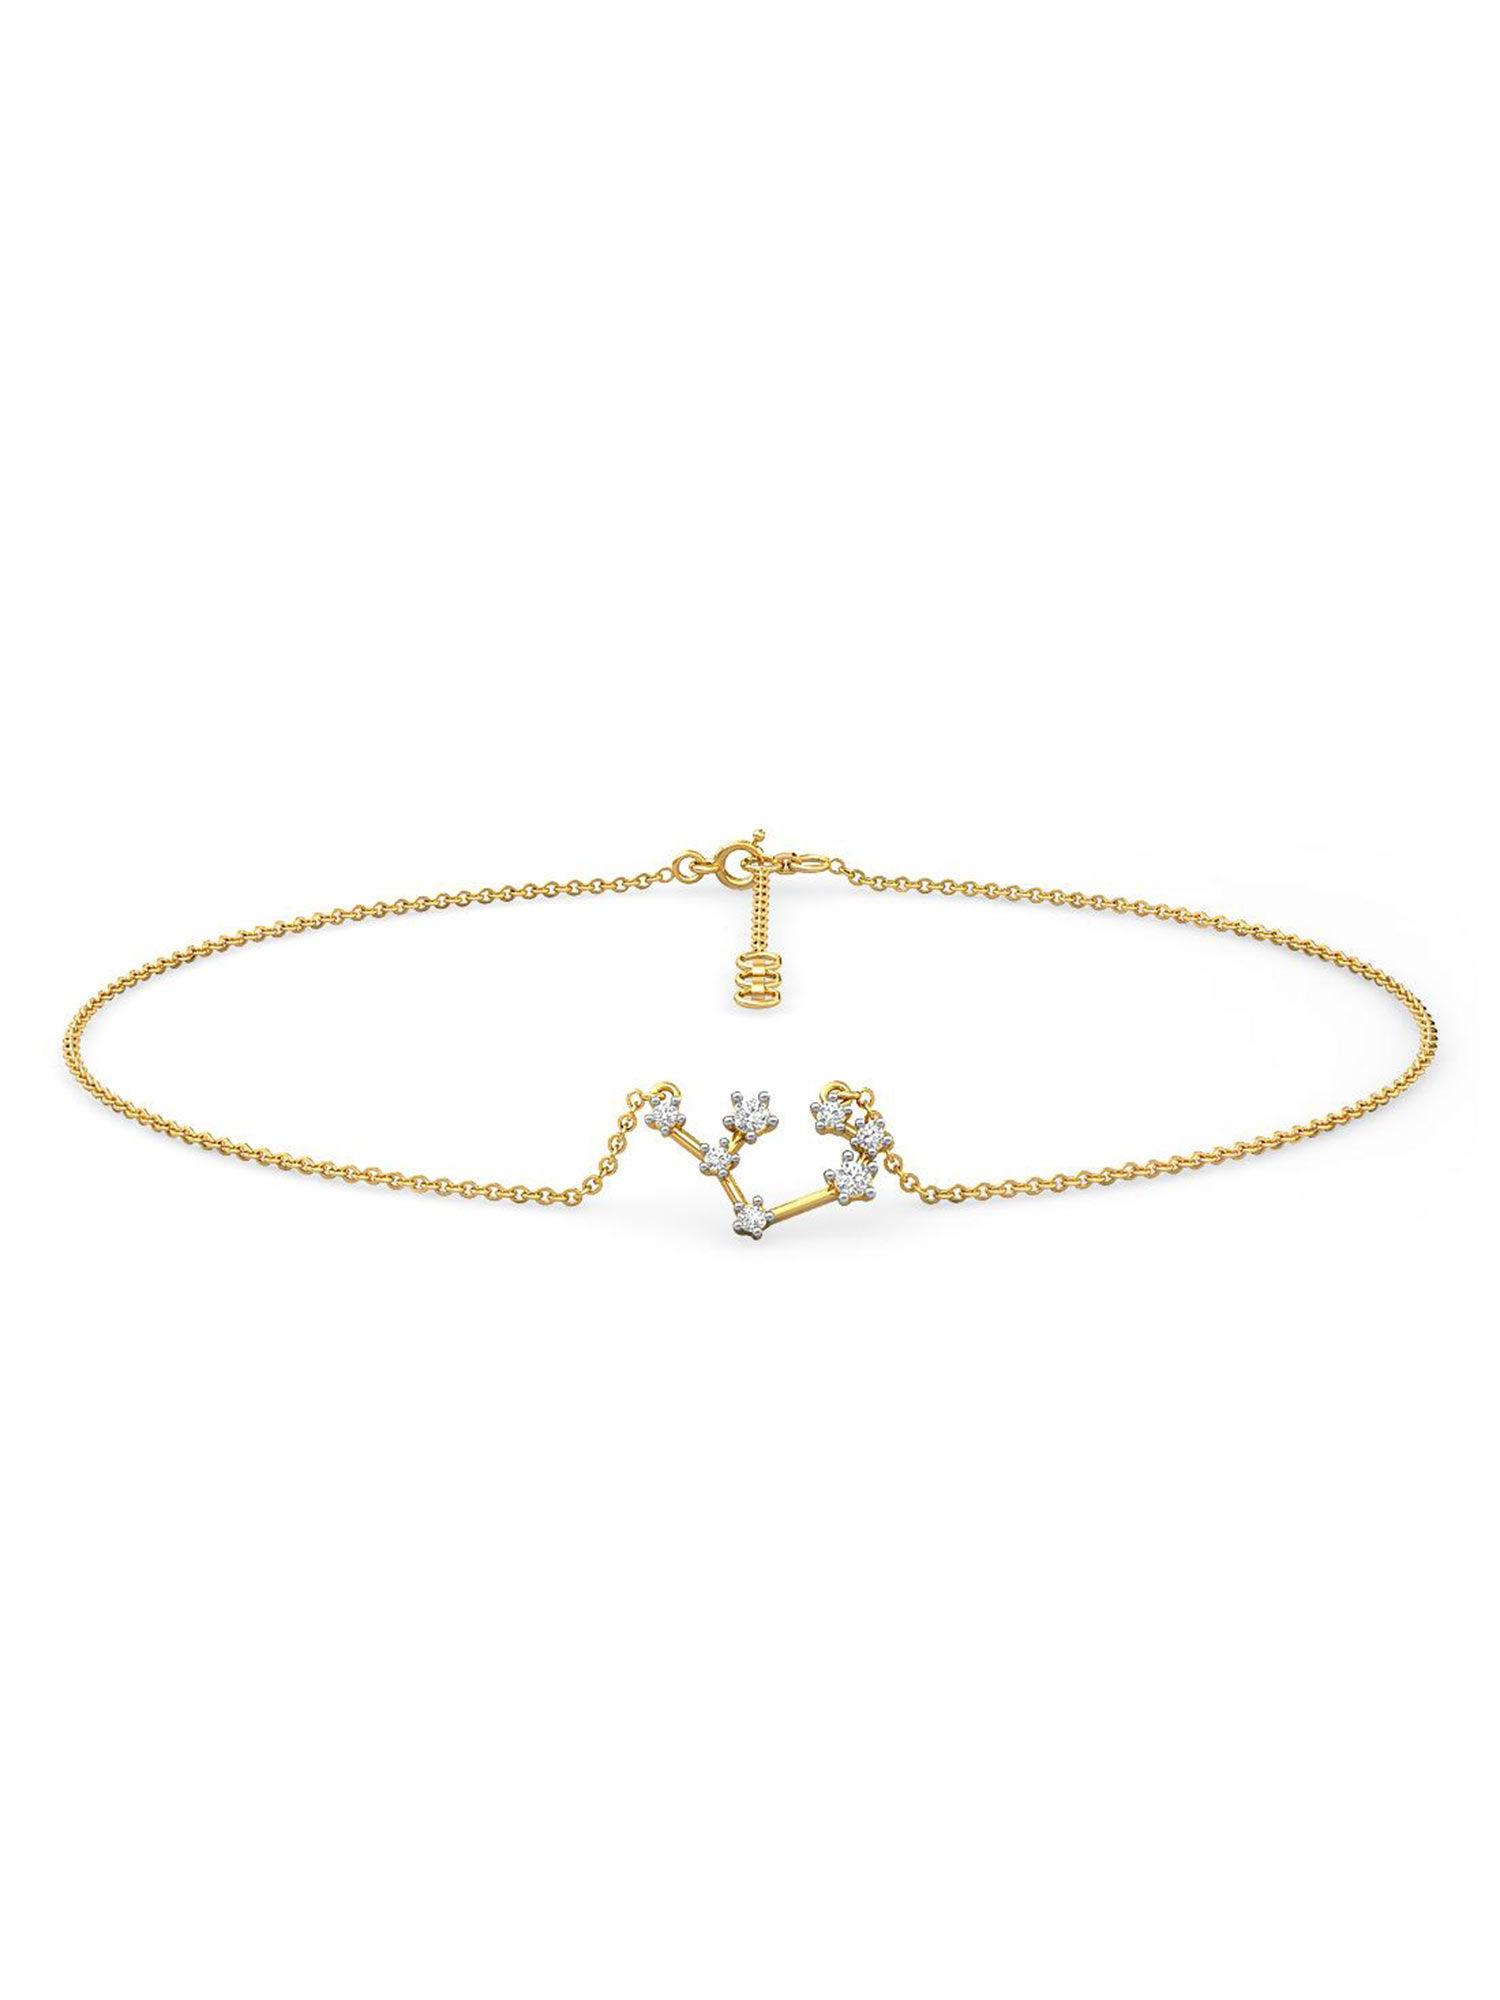 sagittarius 14k yellow gold and diamond anklet for women